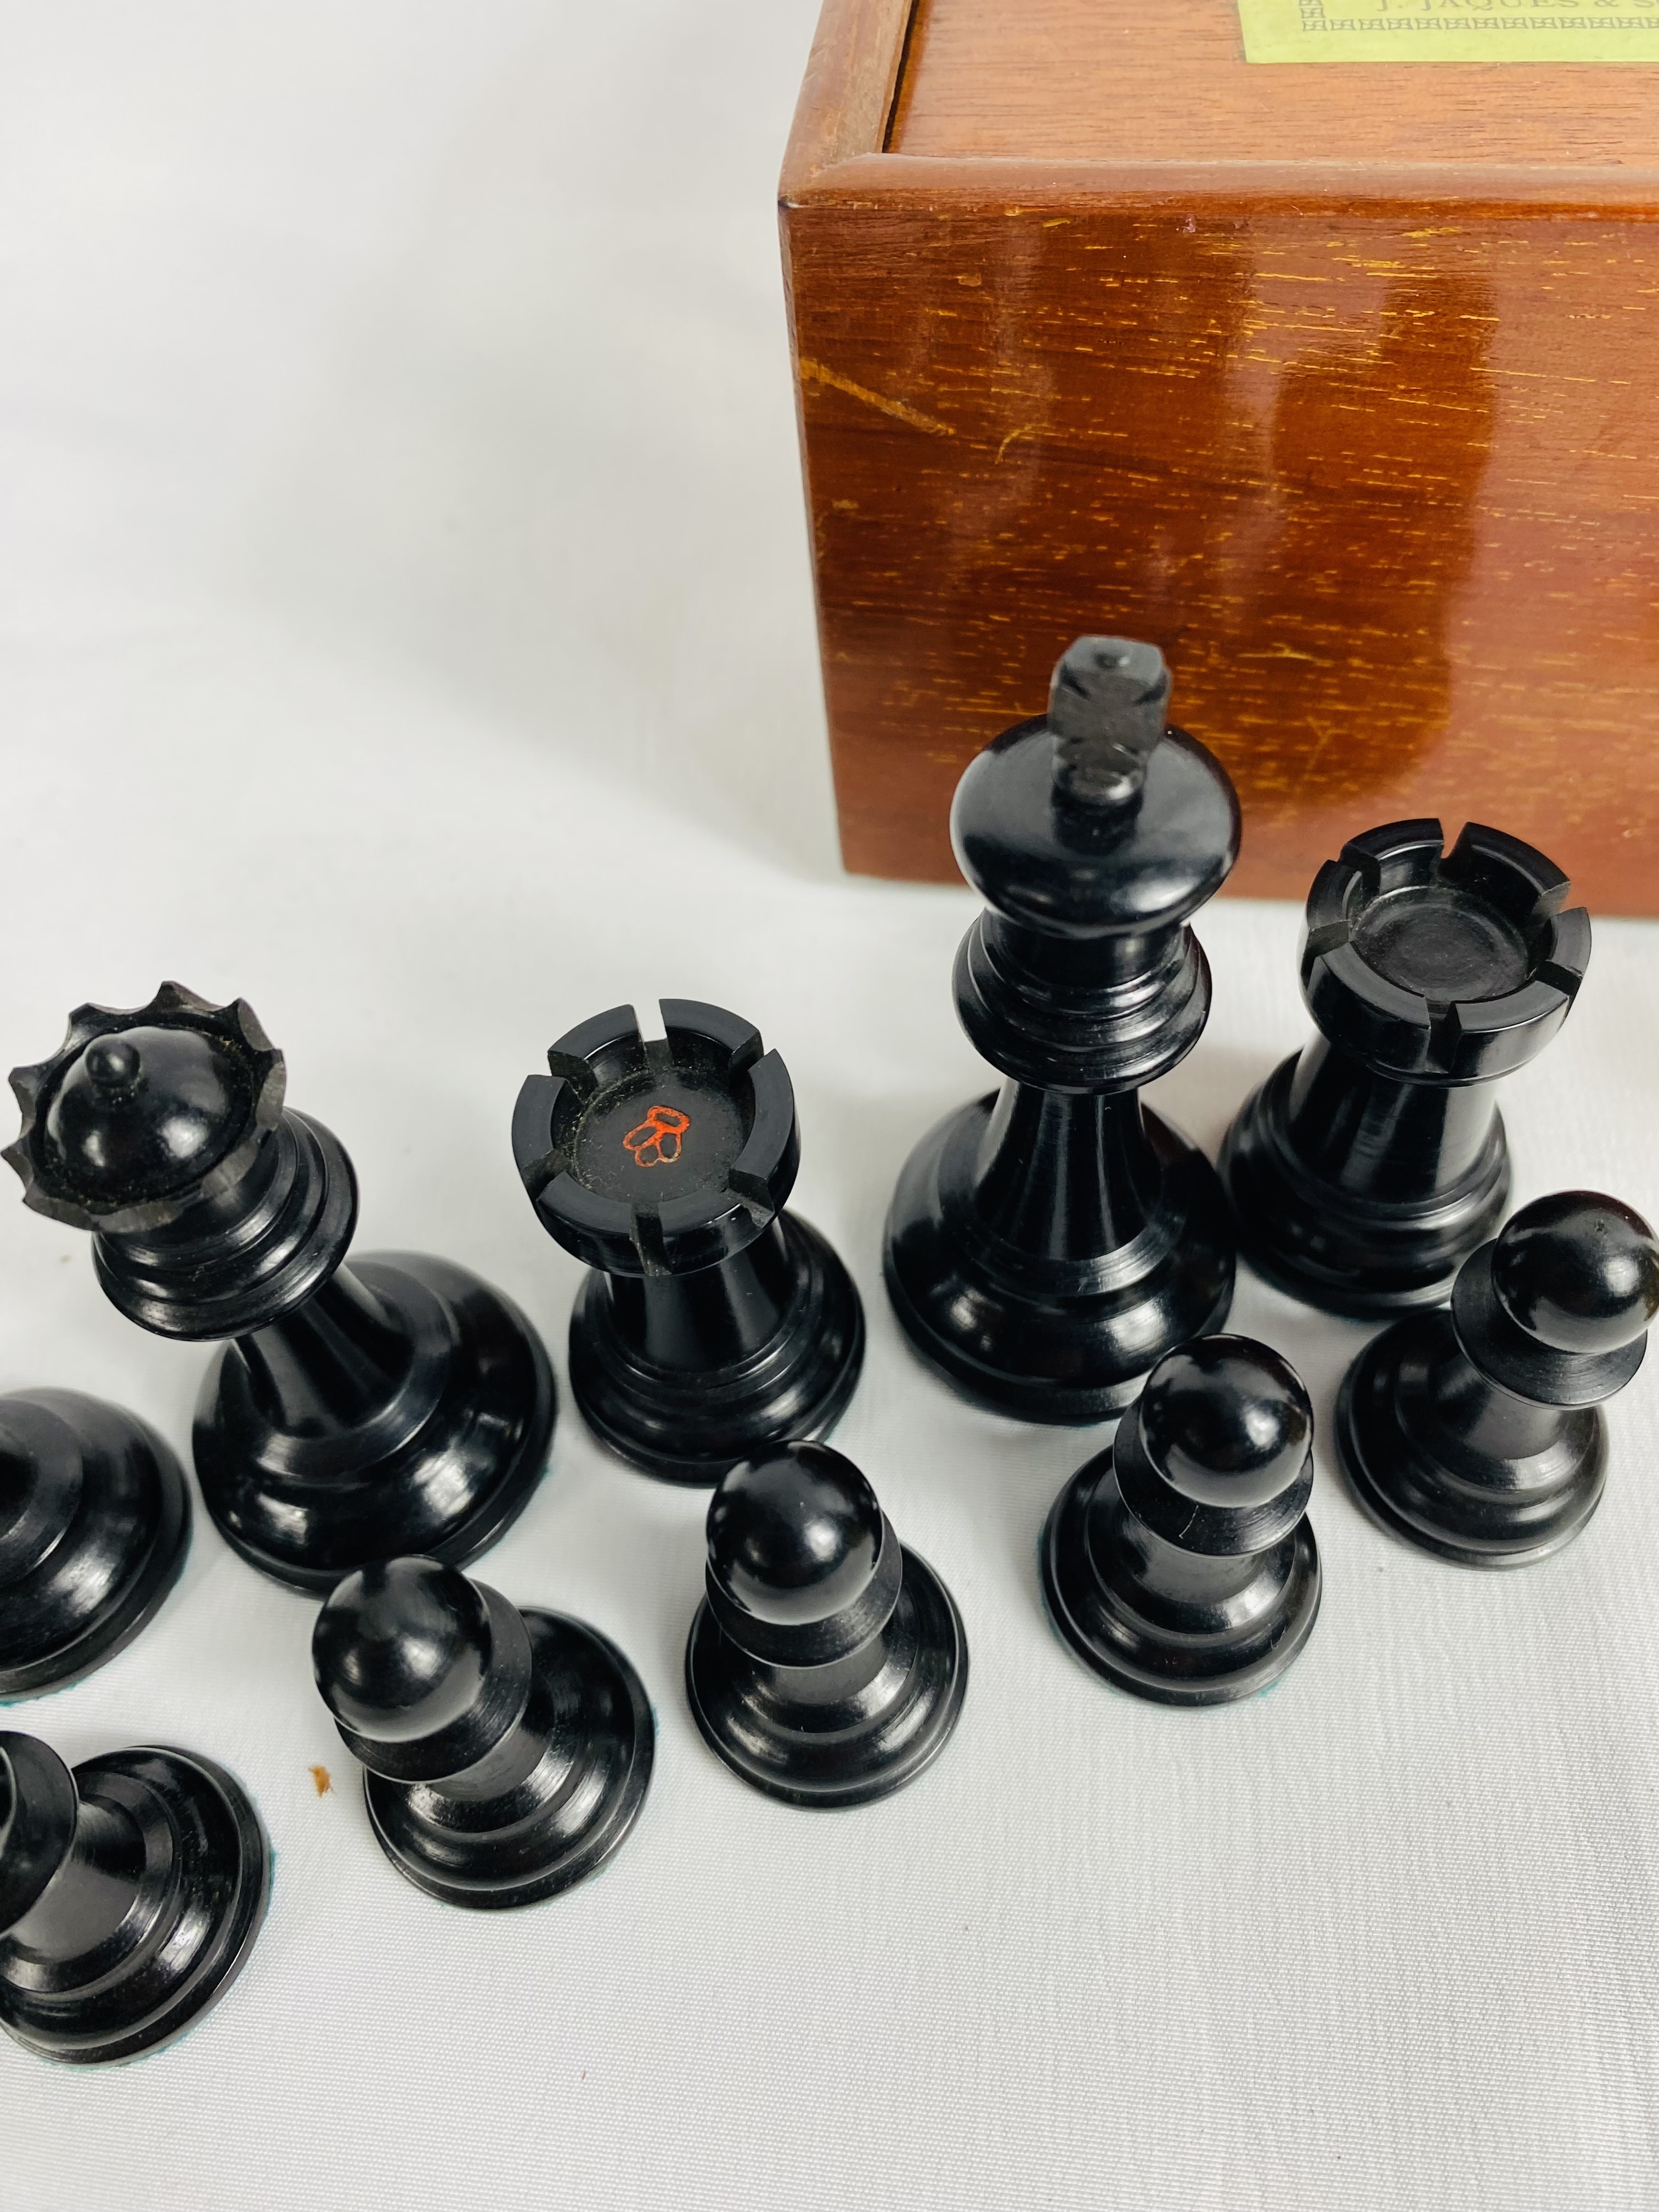 Jacques and Son Staunton style chess set - Image 3 of 5